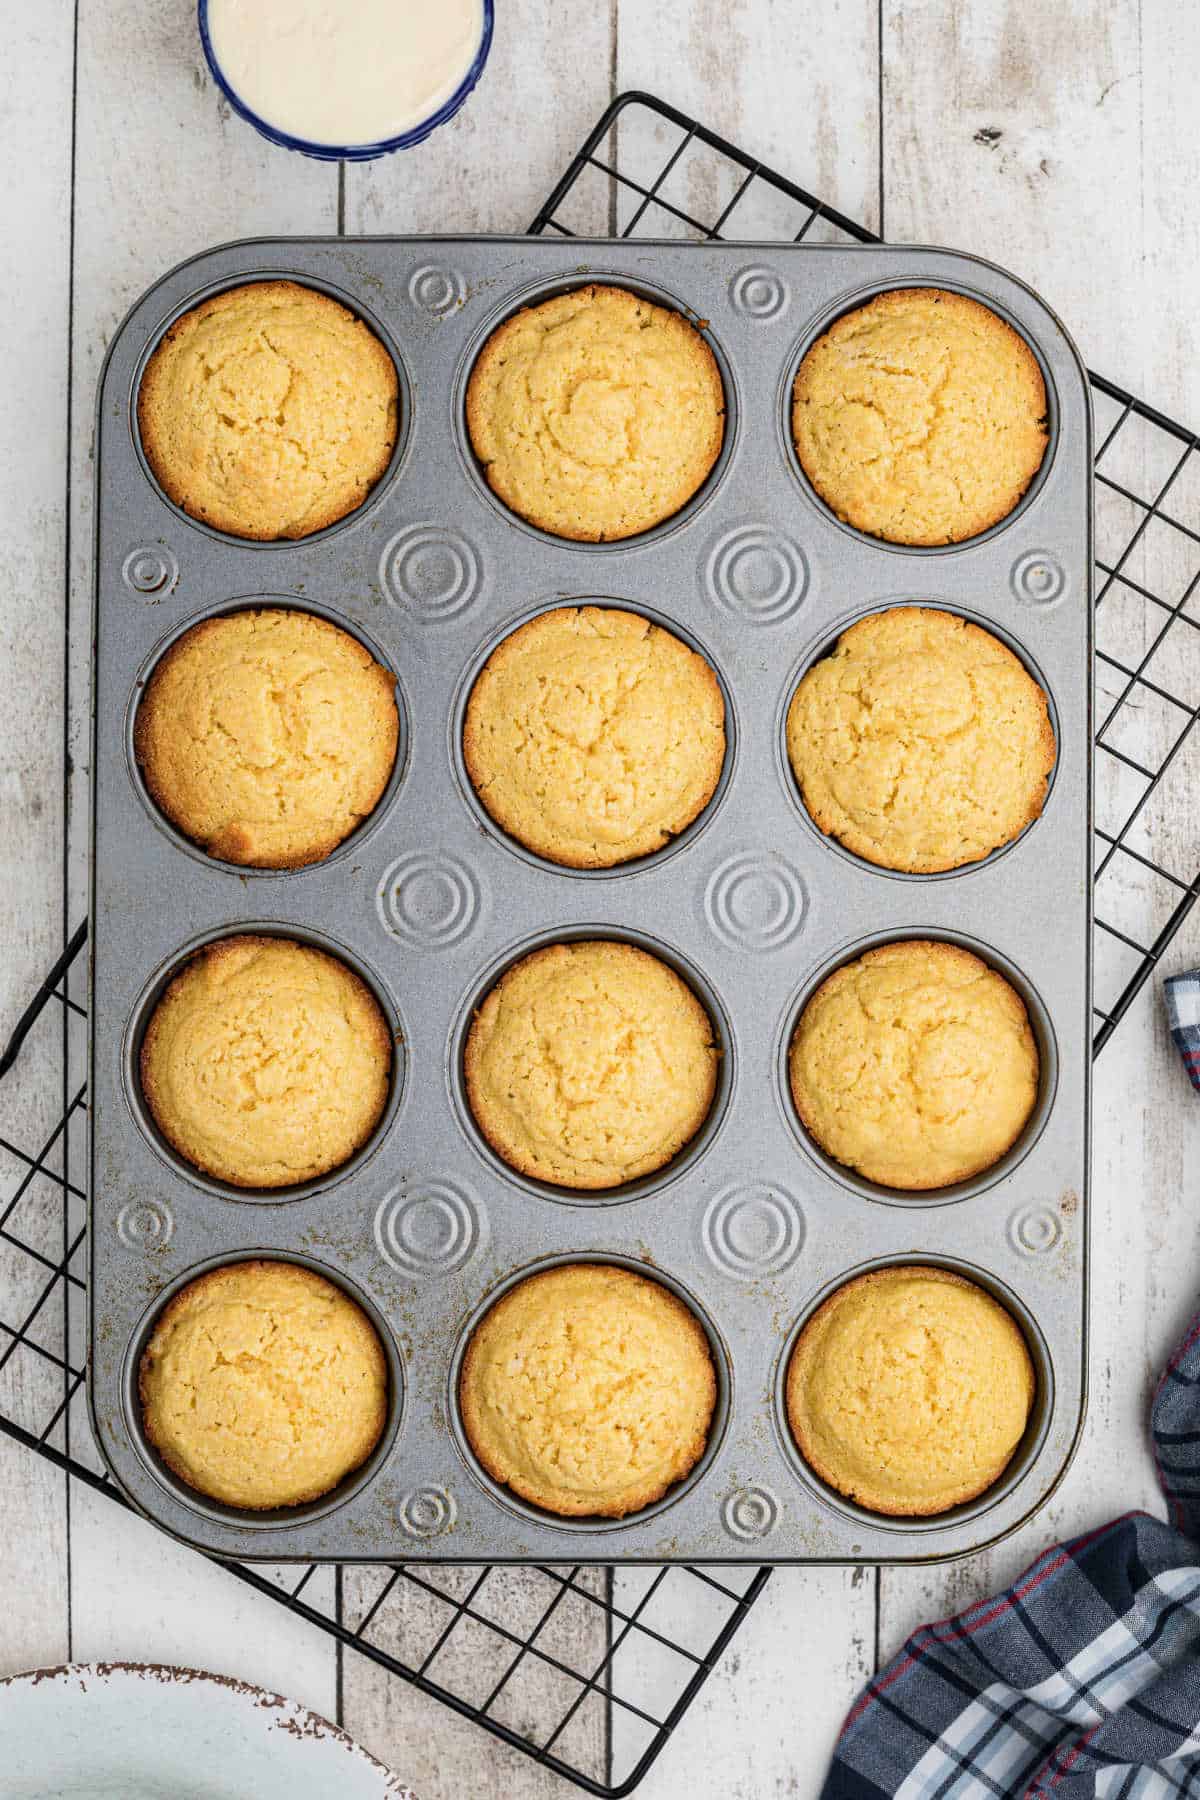 Overhead view of a muffin tin full of baked corn muffins cooling on a wire rack.